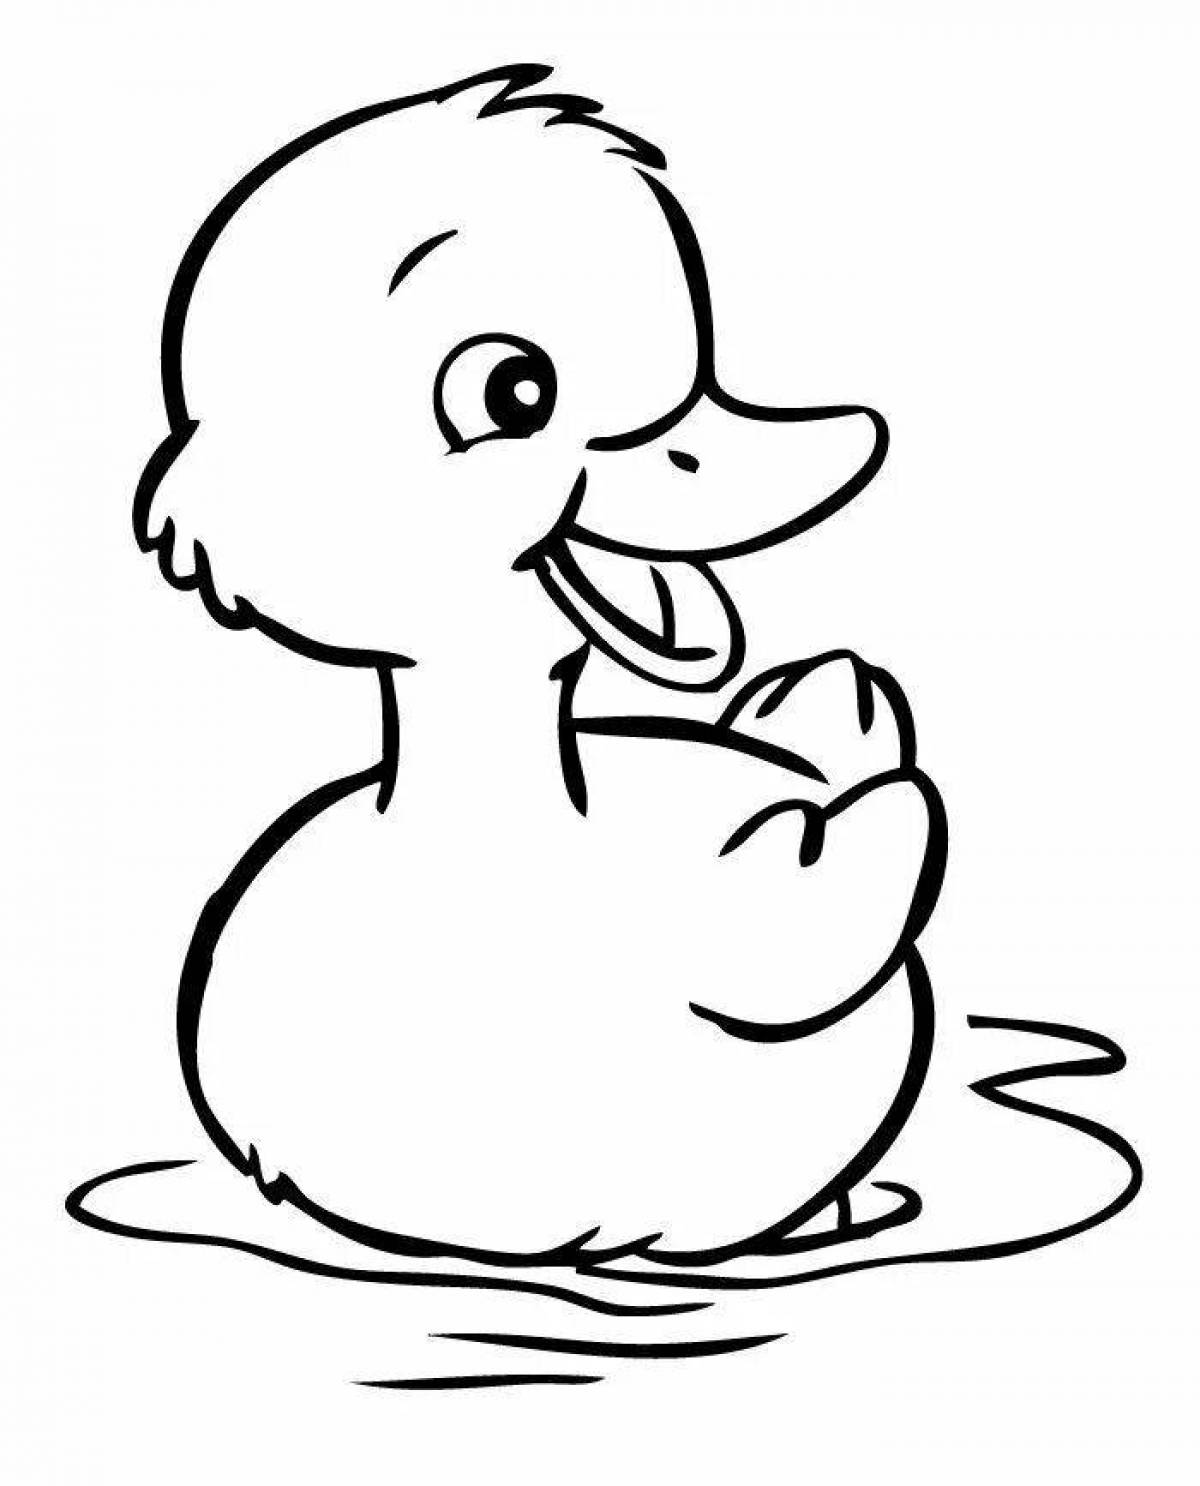 Coloring happy duck for kids